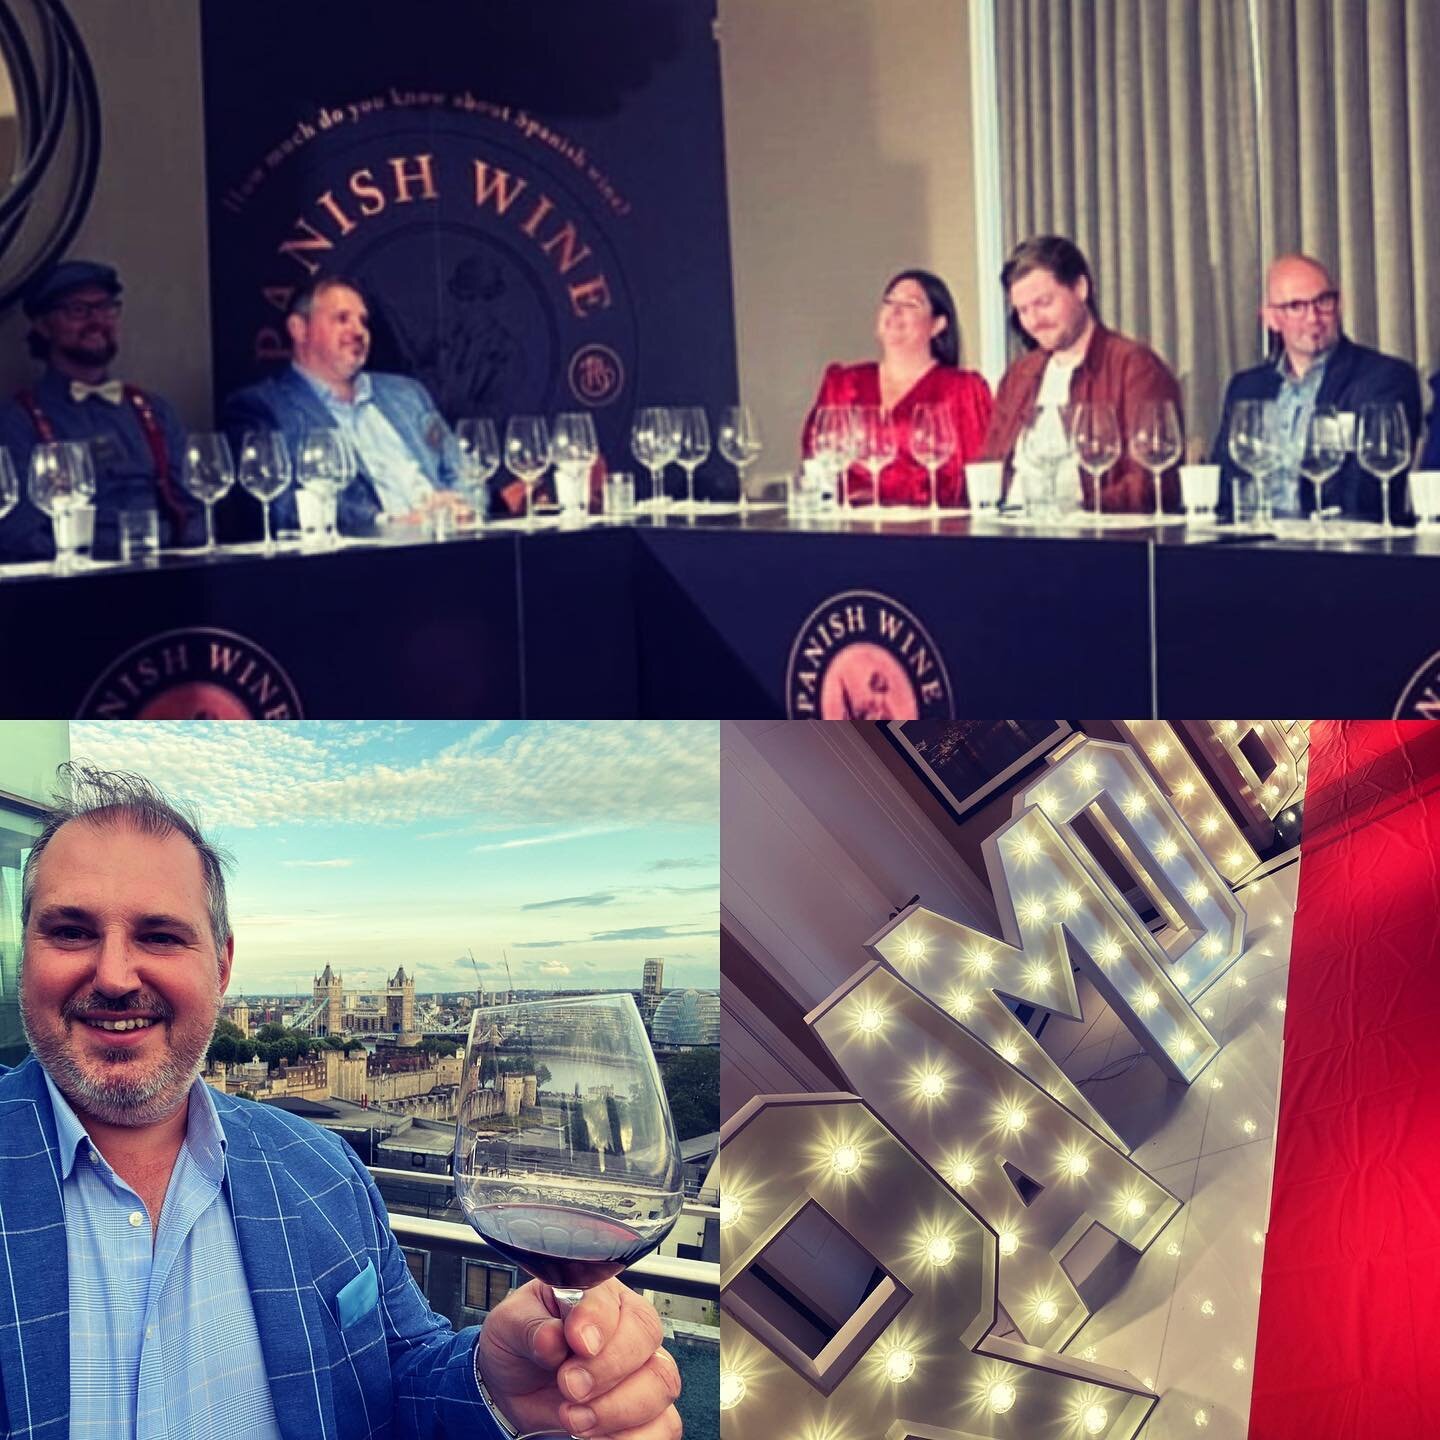 Great fun competing as a Grand Finalist @ramonbilbao_uk #spanishwinemasters last night @fourseasons 10 Trinity Square - a very impressive property with great views of #towerbridge Sadly the trophy isn&rsquo;t coming back to Scotland with me this time